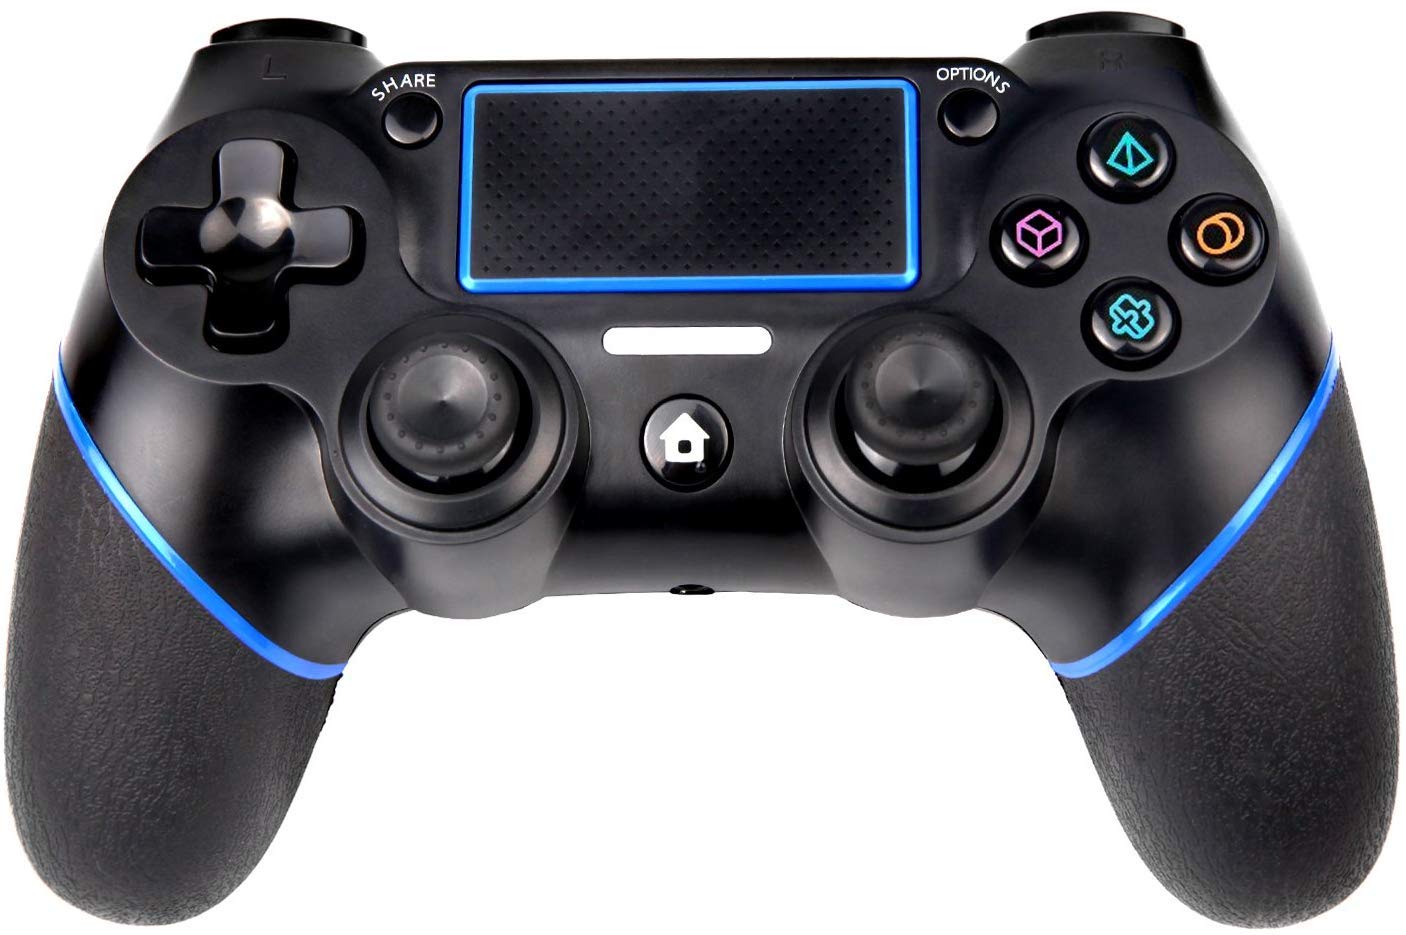 Upgrade Rechargeable Gamepad Remote for Playstation 4/Slim/Pro Console/PC Game with Dual Shock Blue BRHE PS-4 Wireless Controller Touch Pad and USB Cable Thumb Grip Cap 